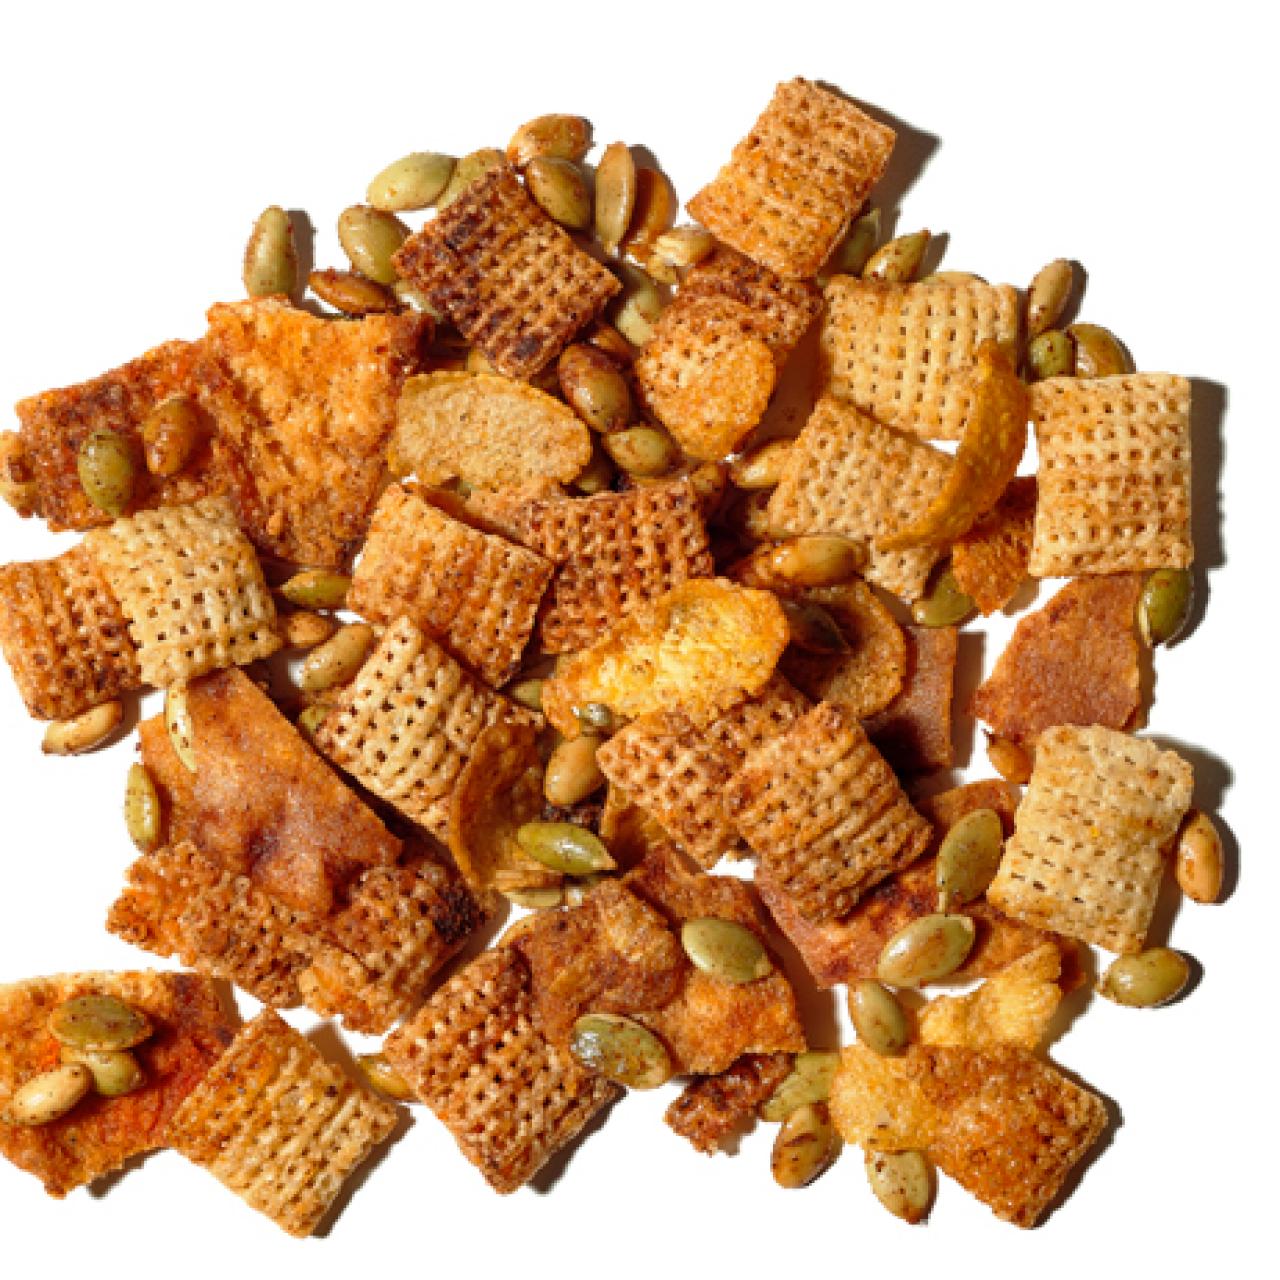 The Best Homemade Chex Mix Recipe - Little Sunny Kitchen